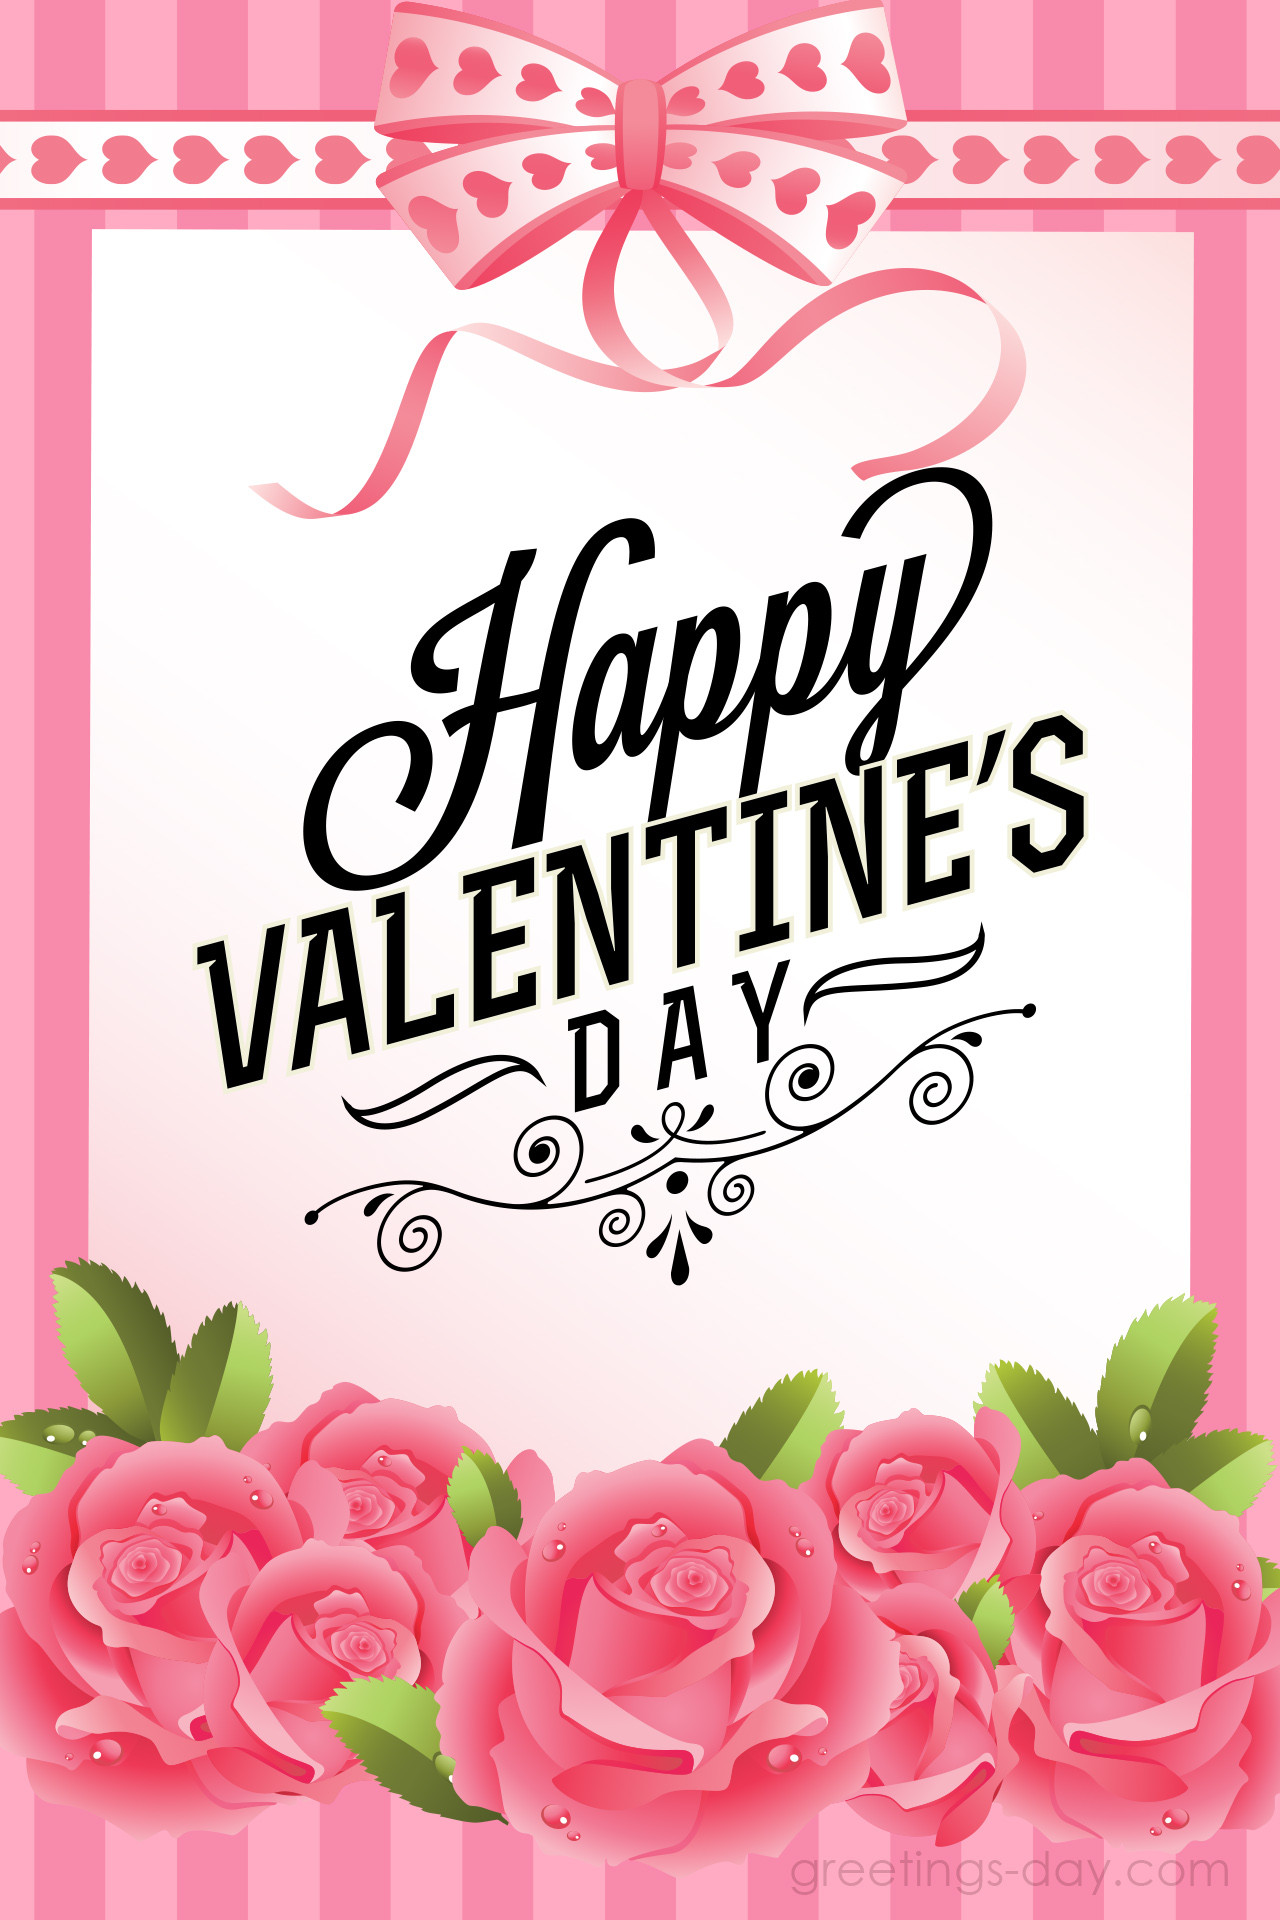 Quotes About Valentines Day
 Valentine s Day Quotes and Flowers for Friends and Family